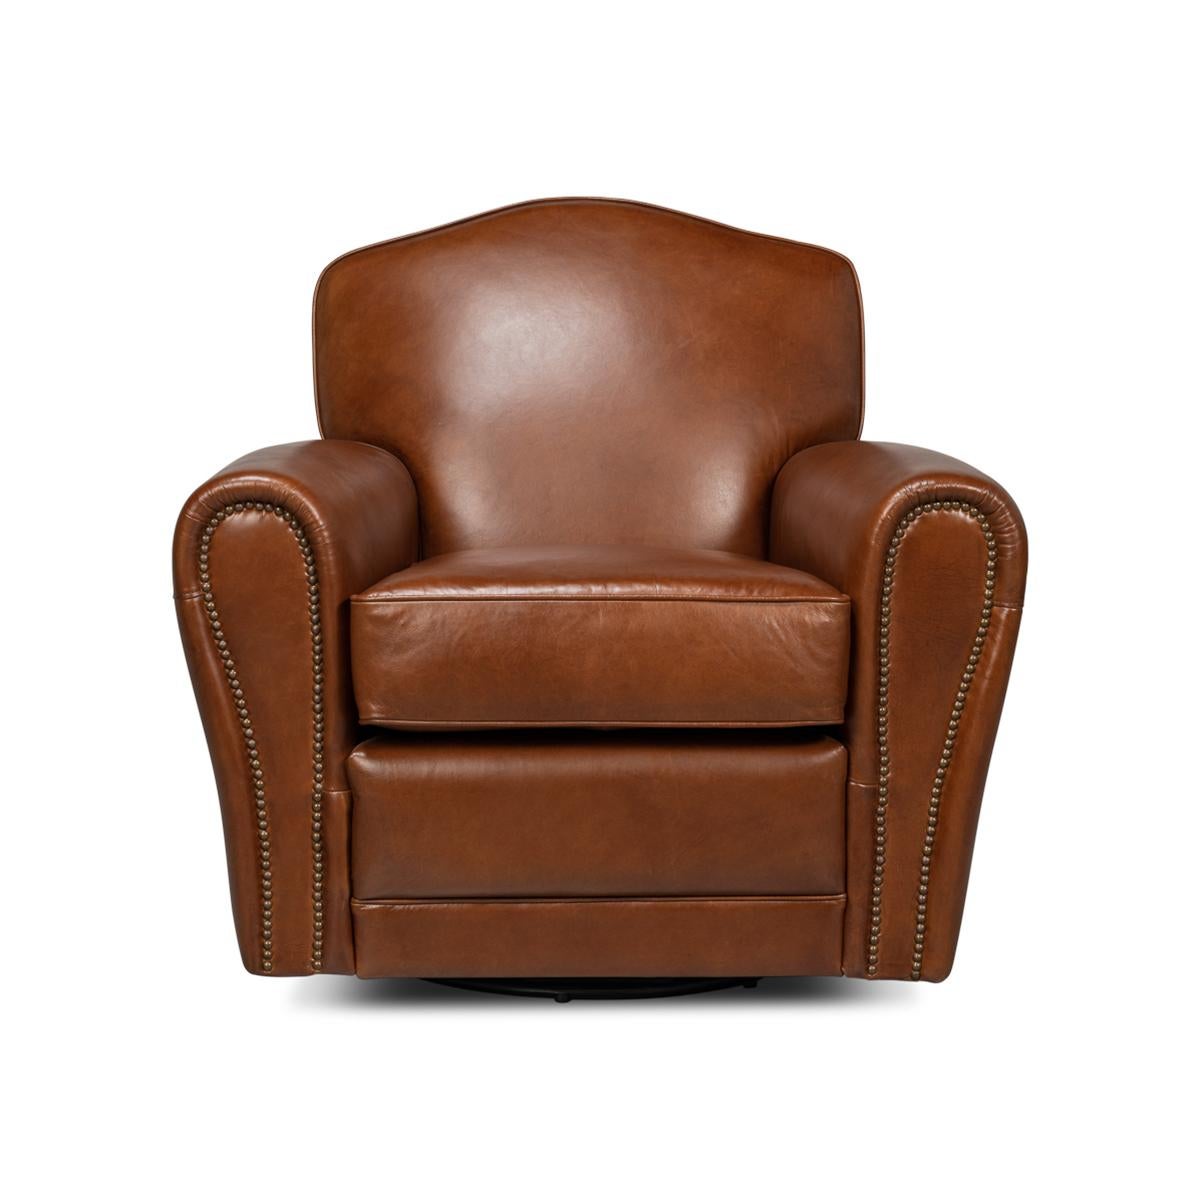 An Art Deco style leather upholstered club chair, in our Havana brown color leather, with long rolled arms, a padded seat back, and cushions, with detailed nailhead trim and raised on a swivel base.

Dimensions: 36